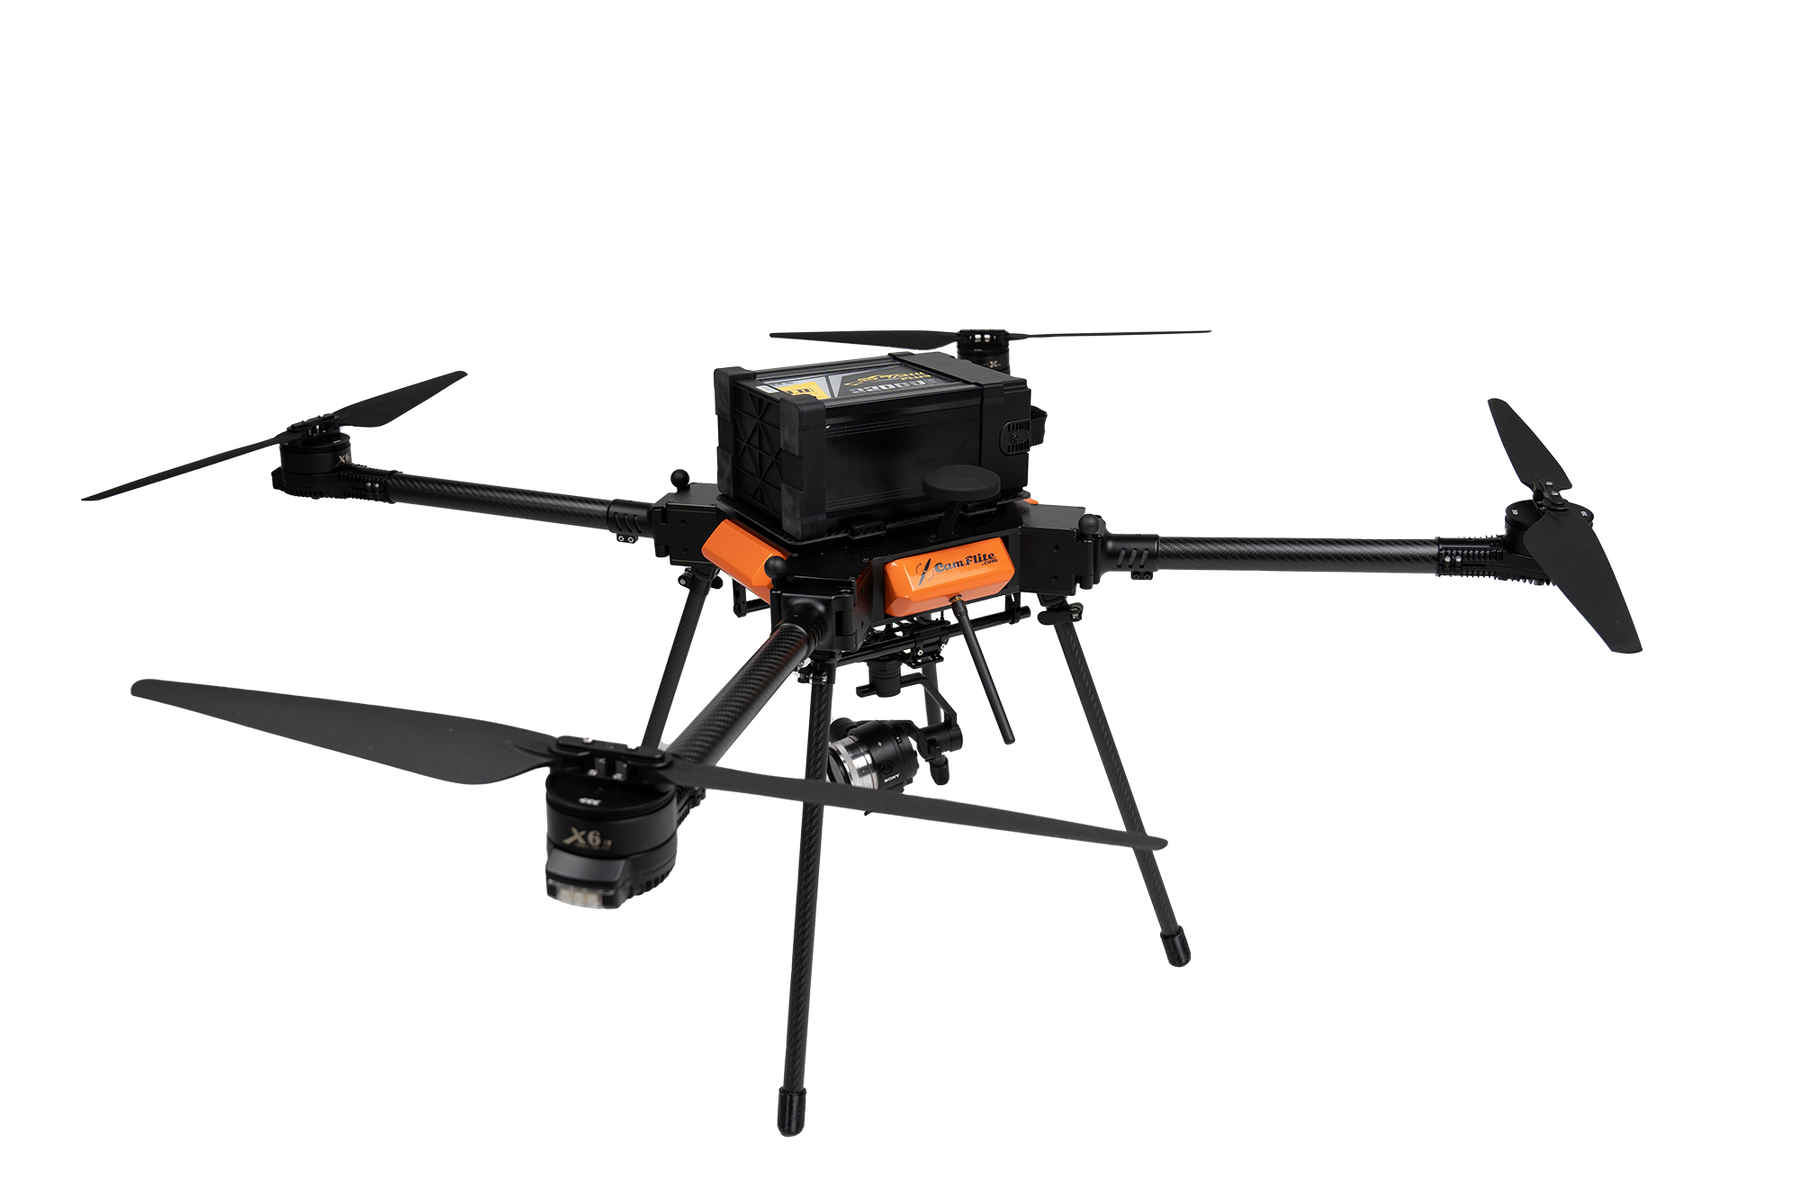 Camflite Ascent X industrial sUAS.  Designed for any payload from lidar to cameras